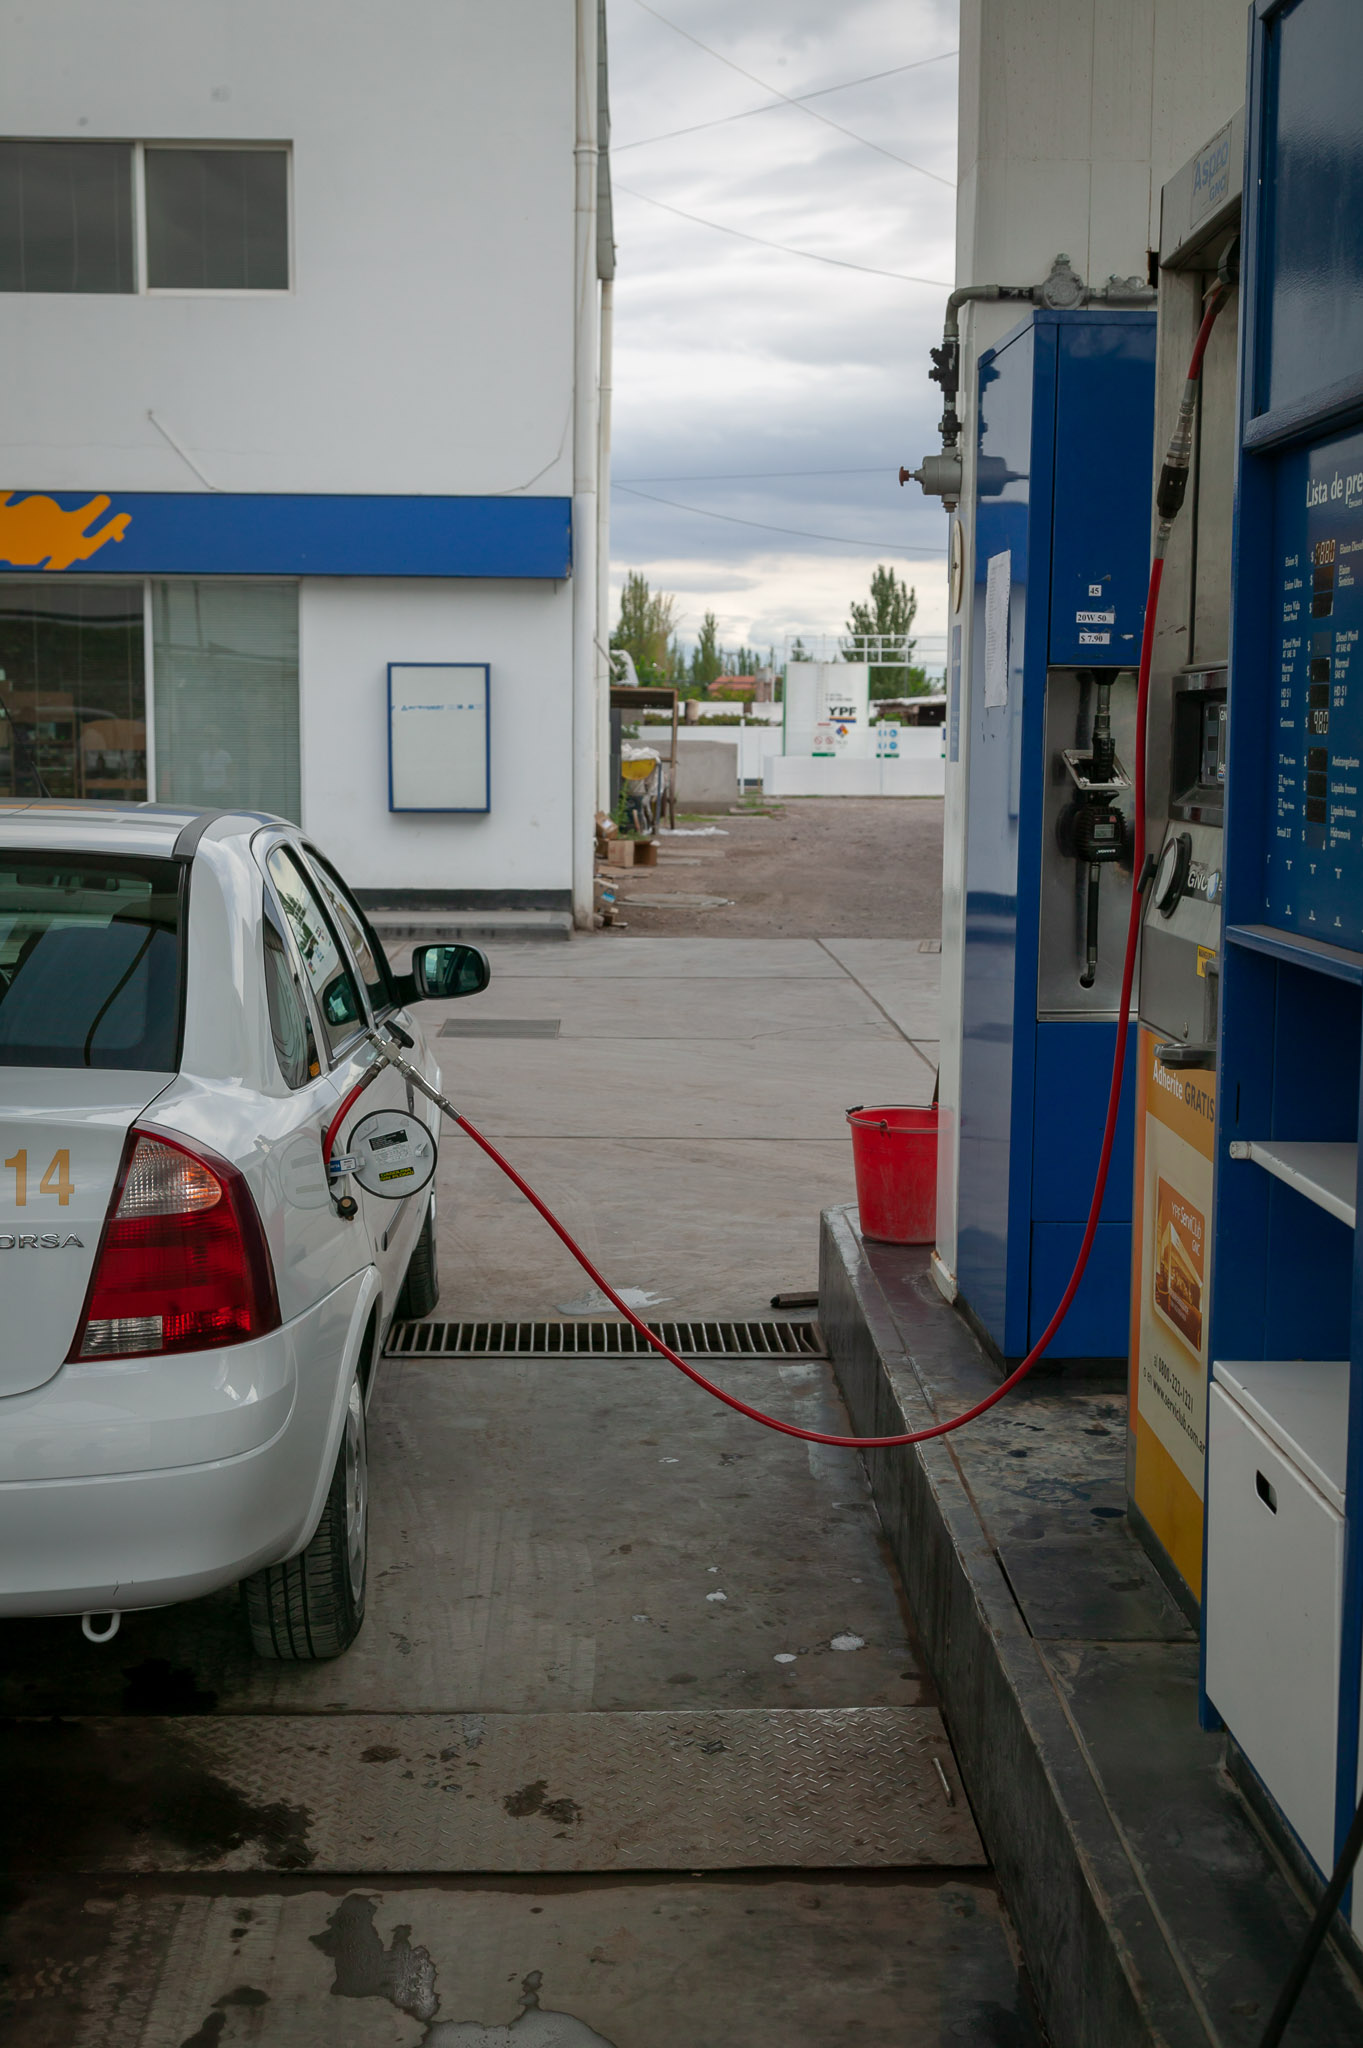 Natural gas is so cheap that most cars use it